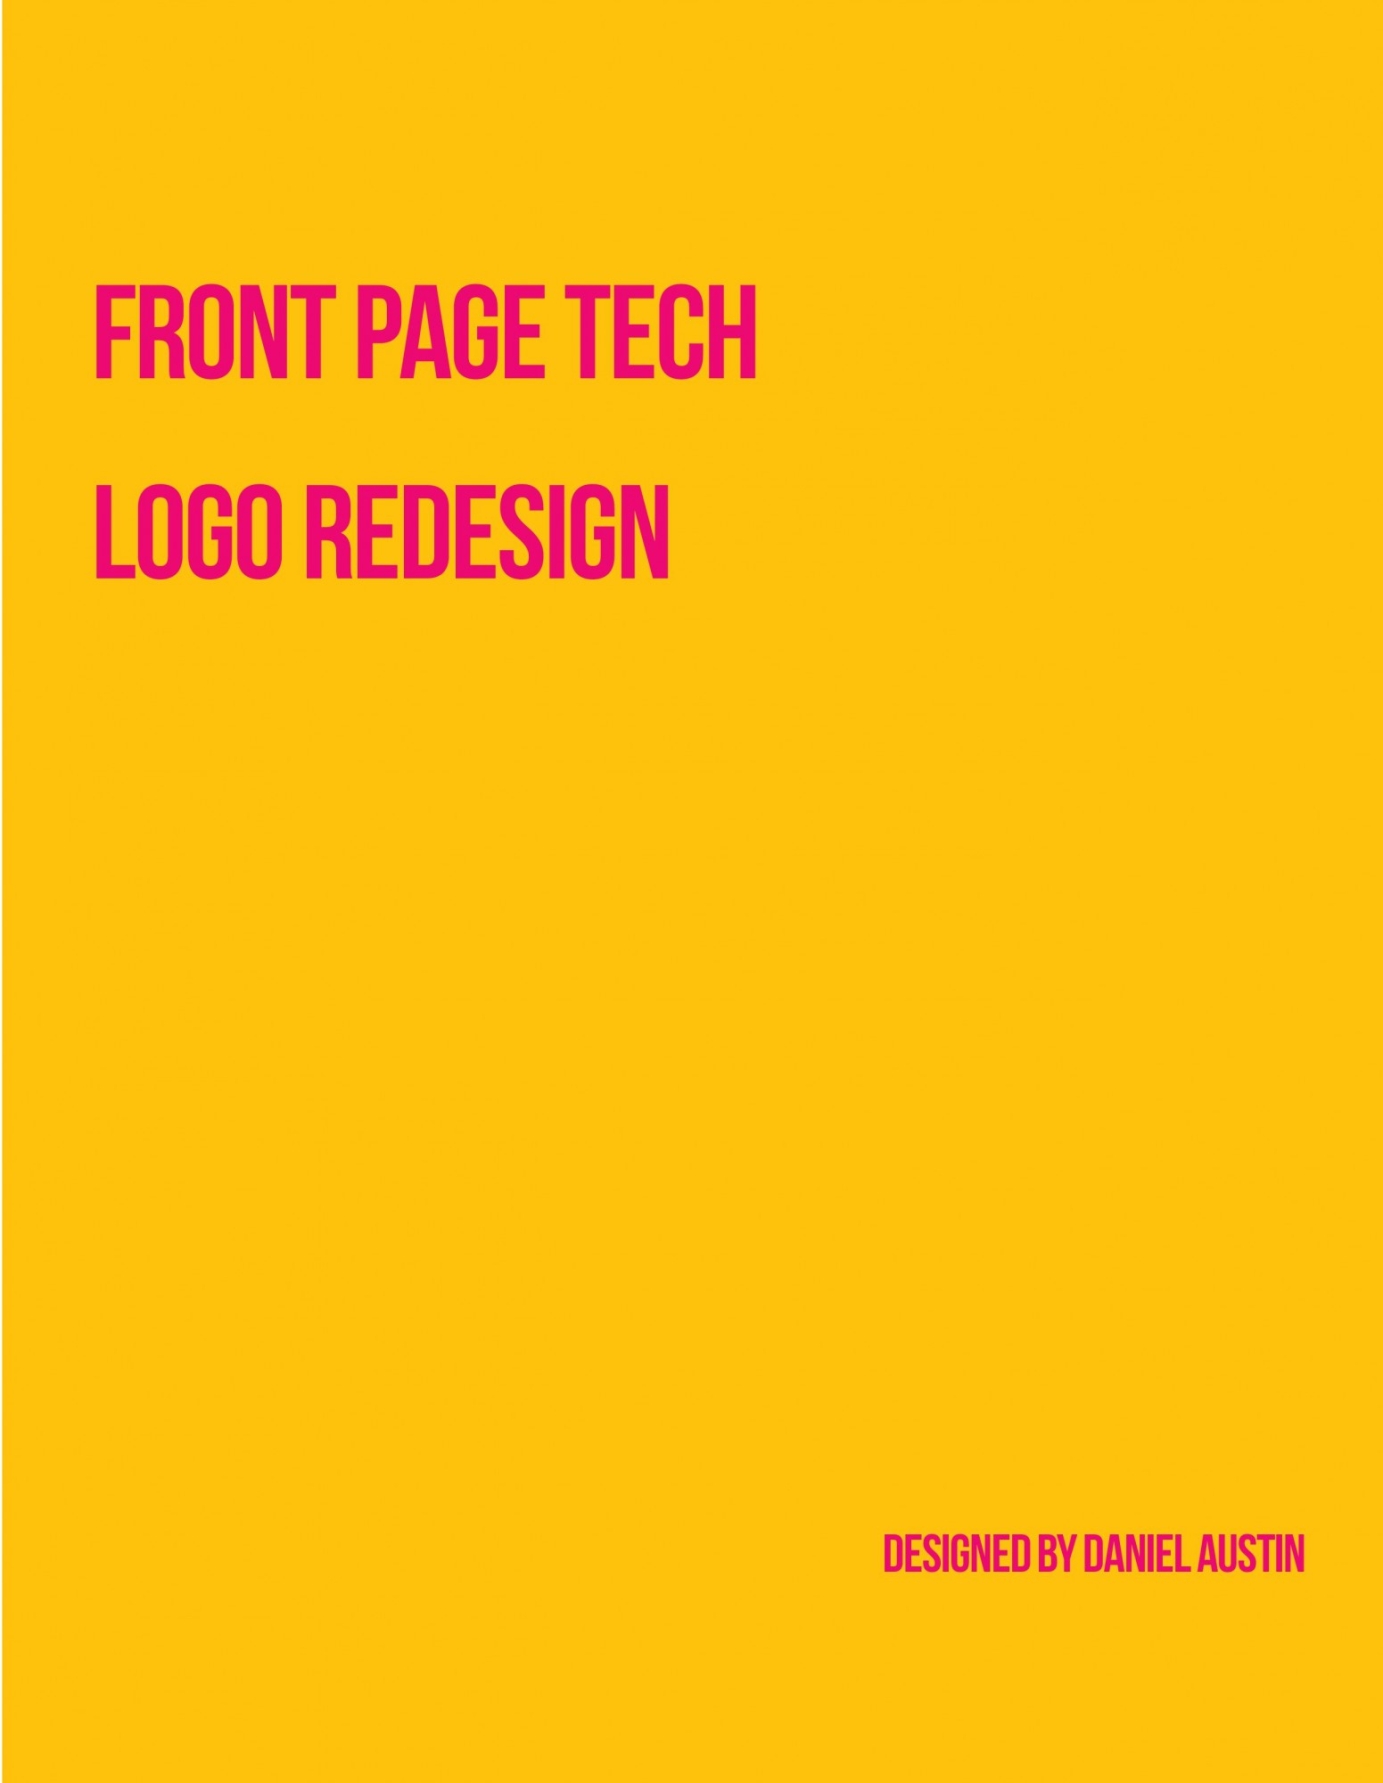 Front Page Tech Logo Redesign